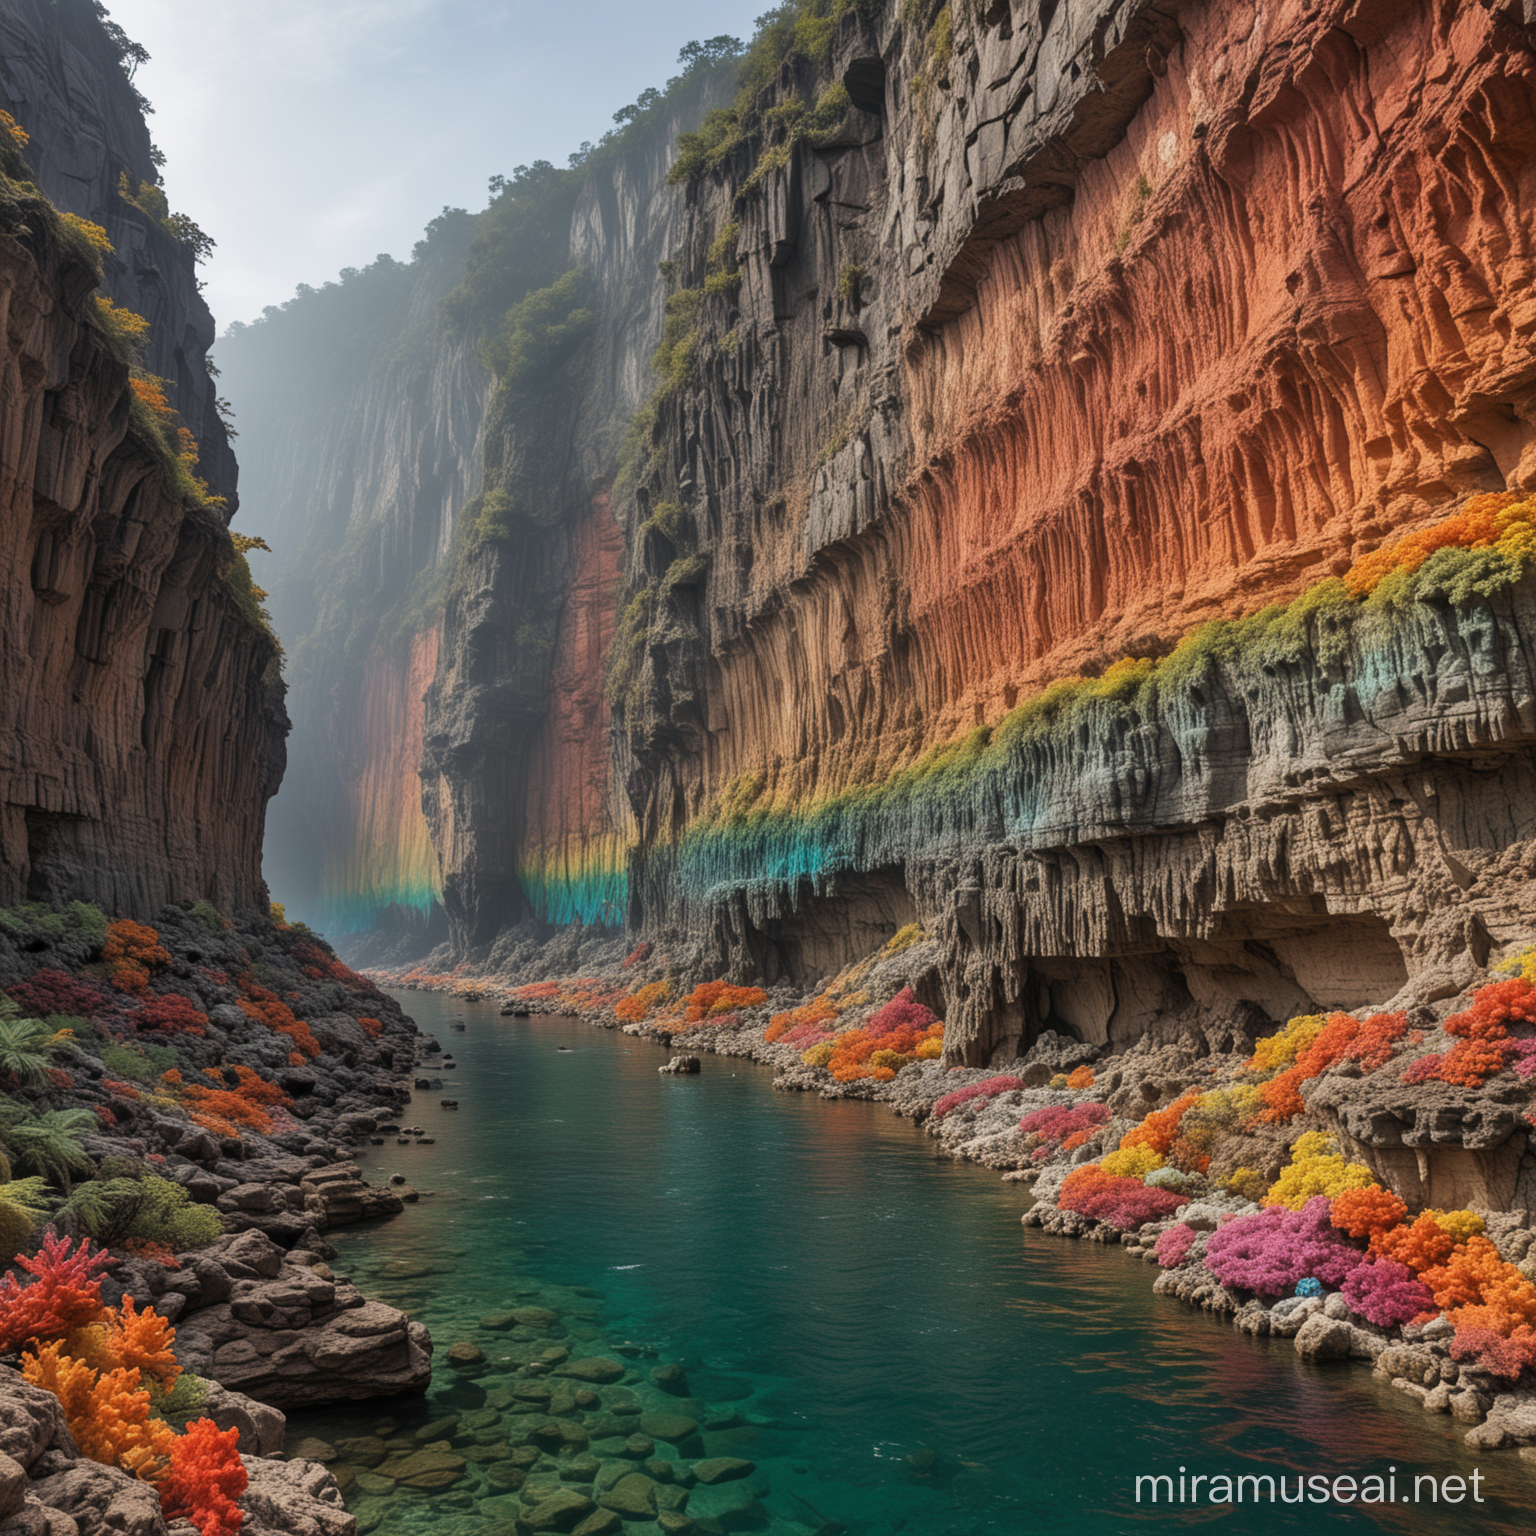 A river canyon with cliff walls, which vary from 50 to 200 feet high. The cliff walls are lined with row upon row of rainbow colored coral. Mixed in among the corals are intact skeletons of plesiosaurs, giant sharks, and other sea creatures.